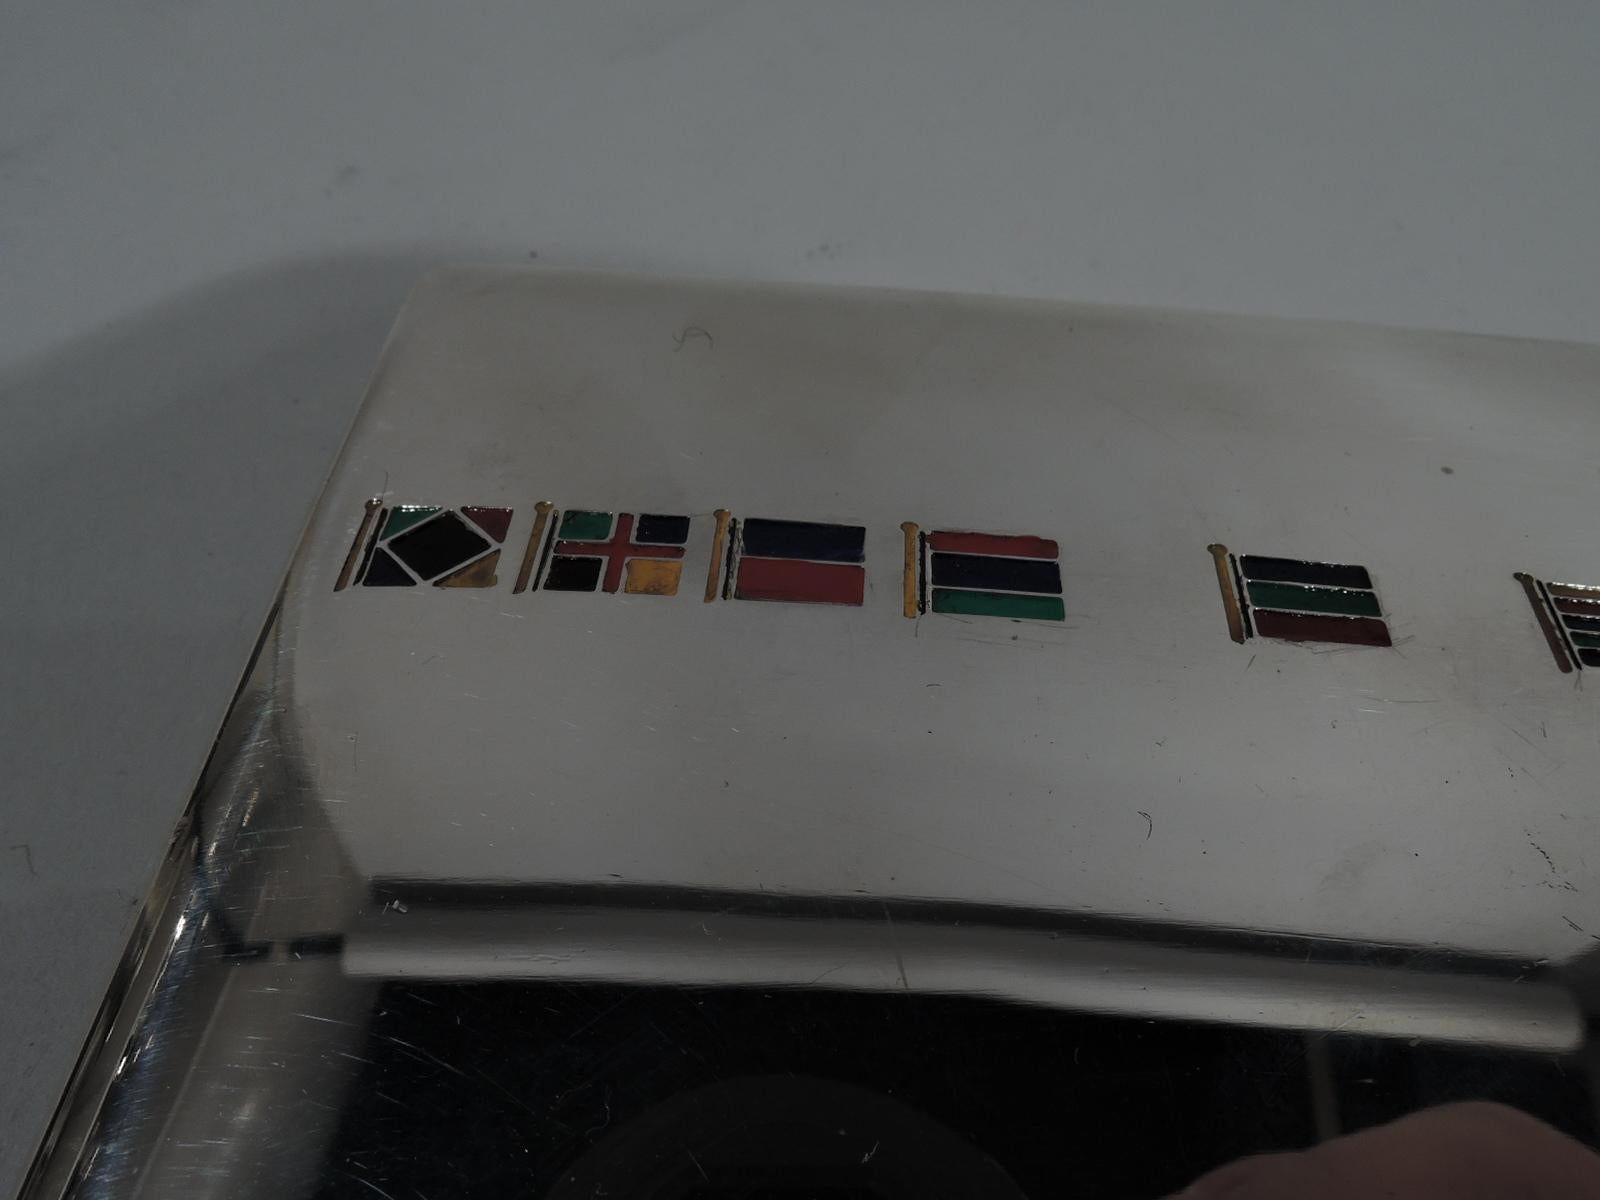 Nautical sterling silver and enamel cigarette case. Made by Thomae in Attleboro, Mass., ca 1960. Rectangular and hinged. Signal flags enameled on front. Gilt interior. Hallmarked. Weight: 4.8 troy ounces.